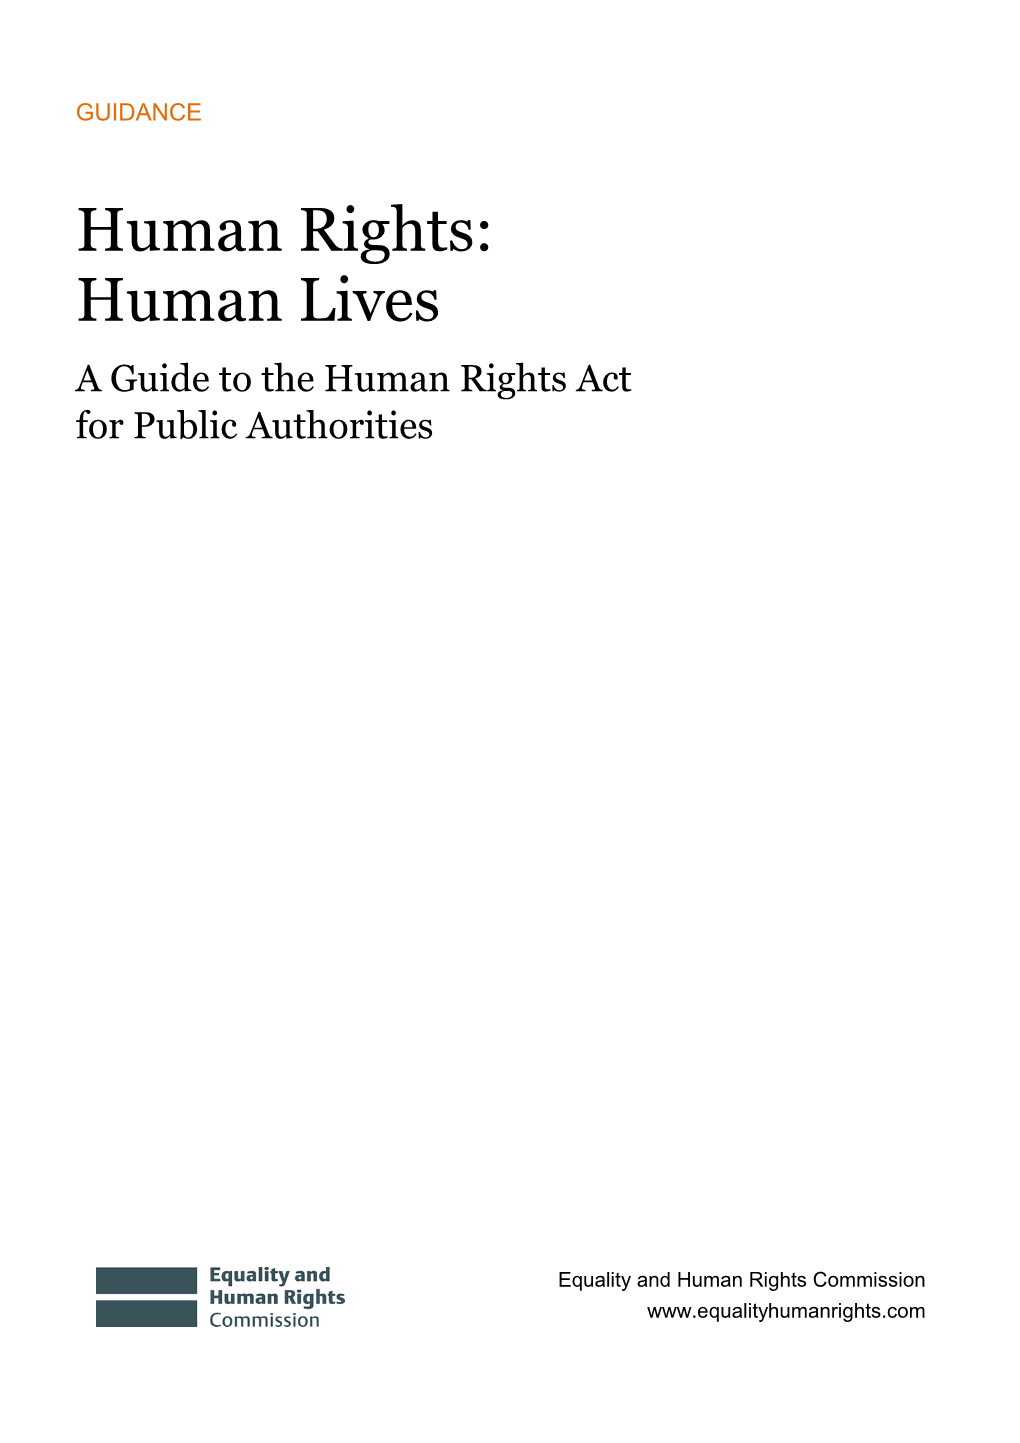 A Guide to the Human Rights Act